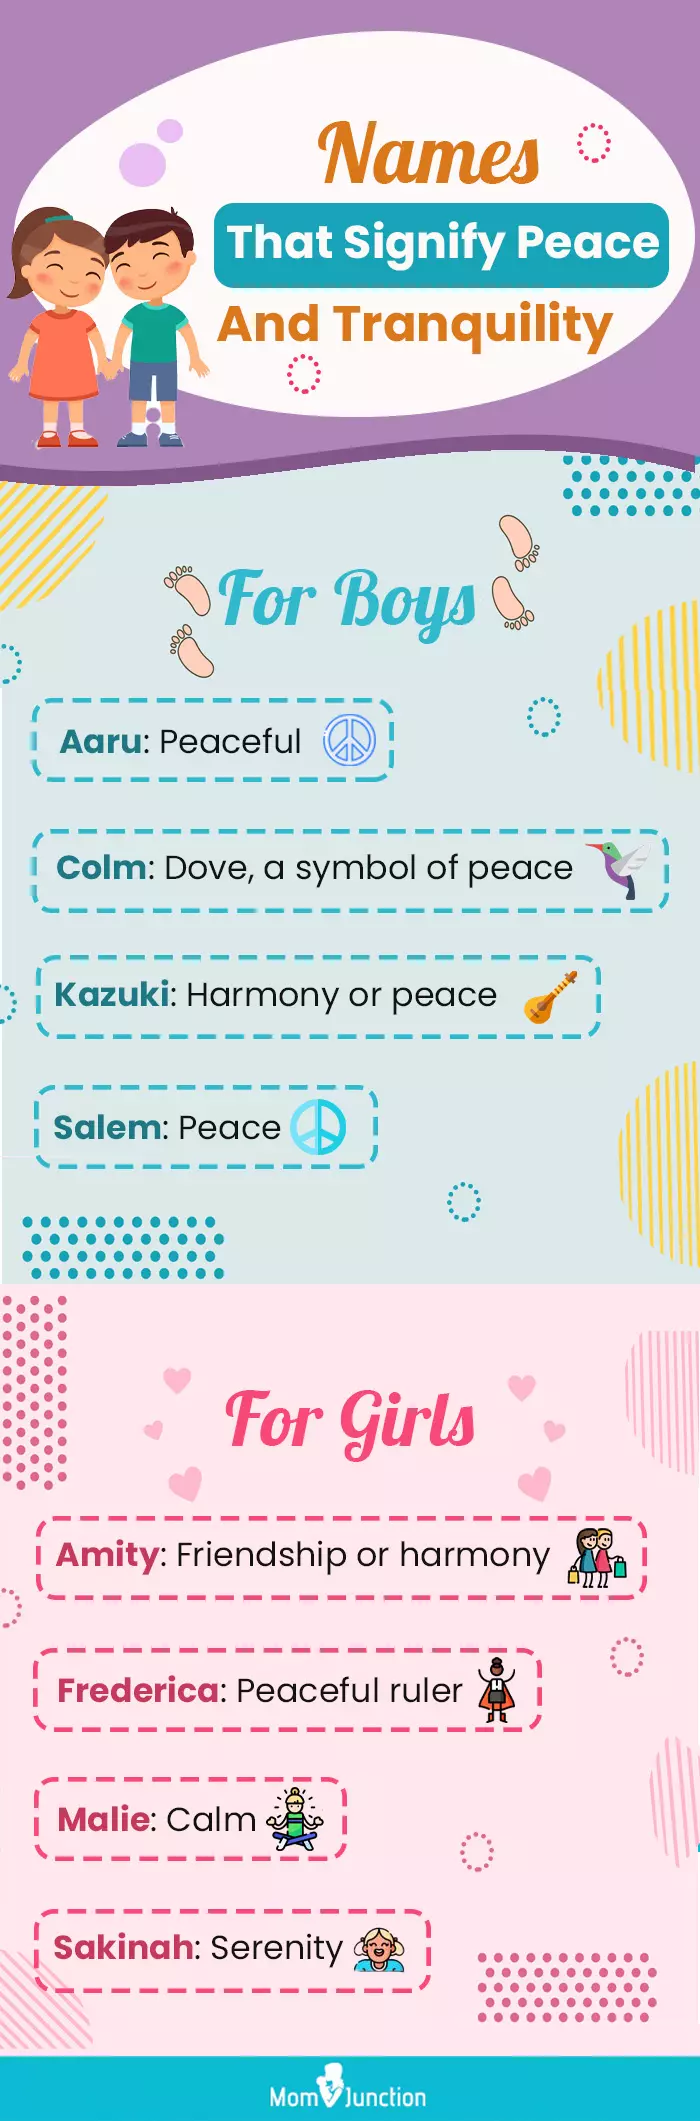 names that signify peace and tranquility (infographic)